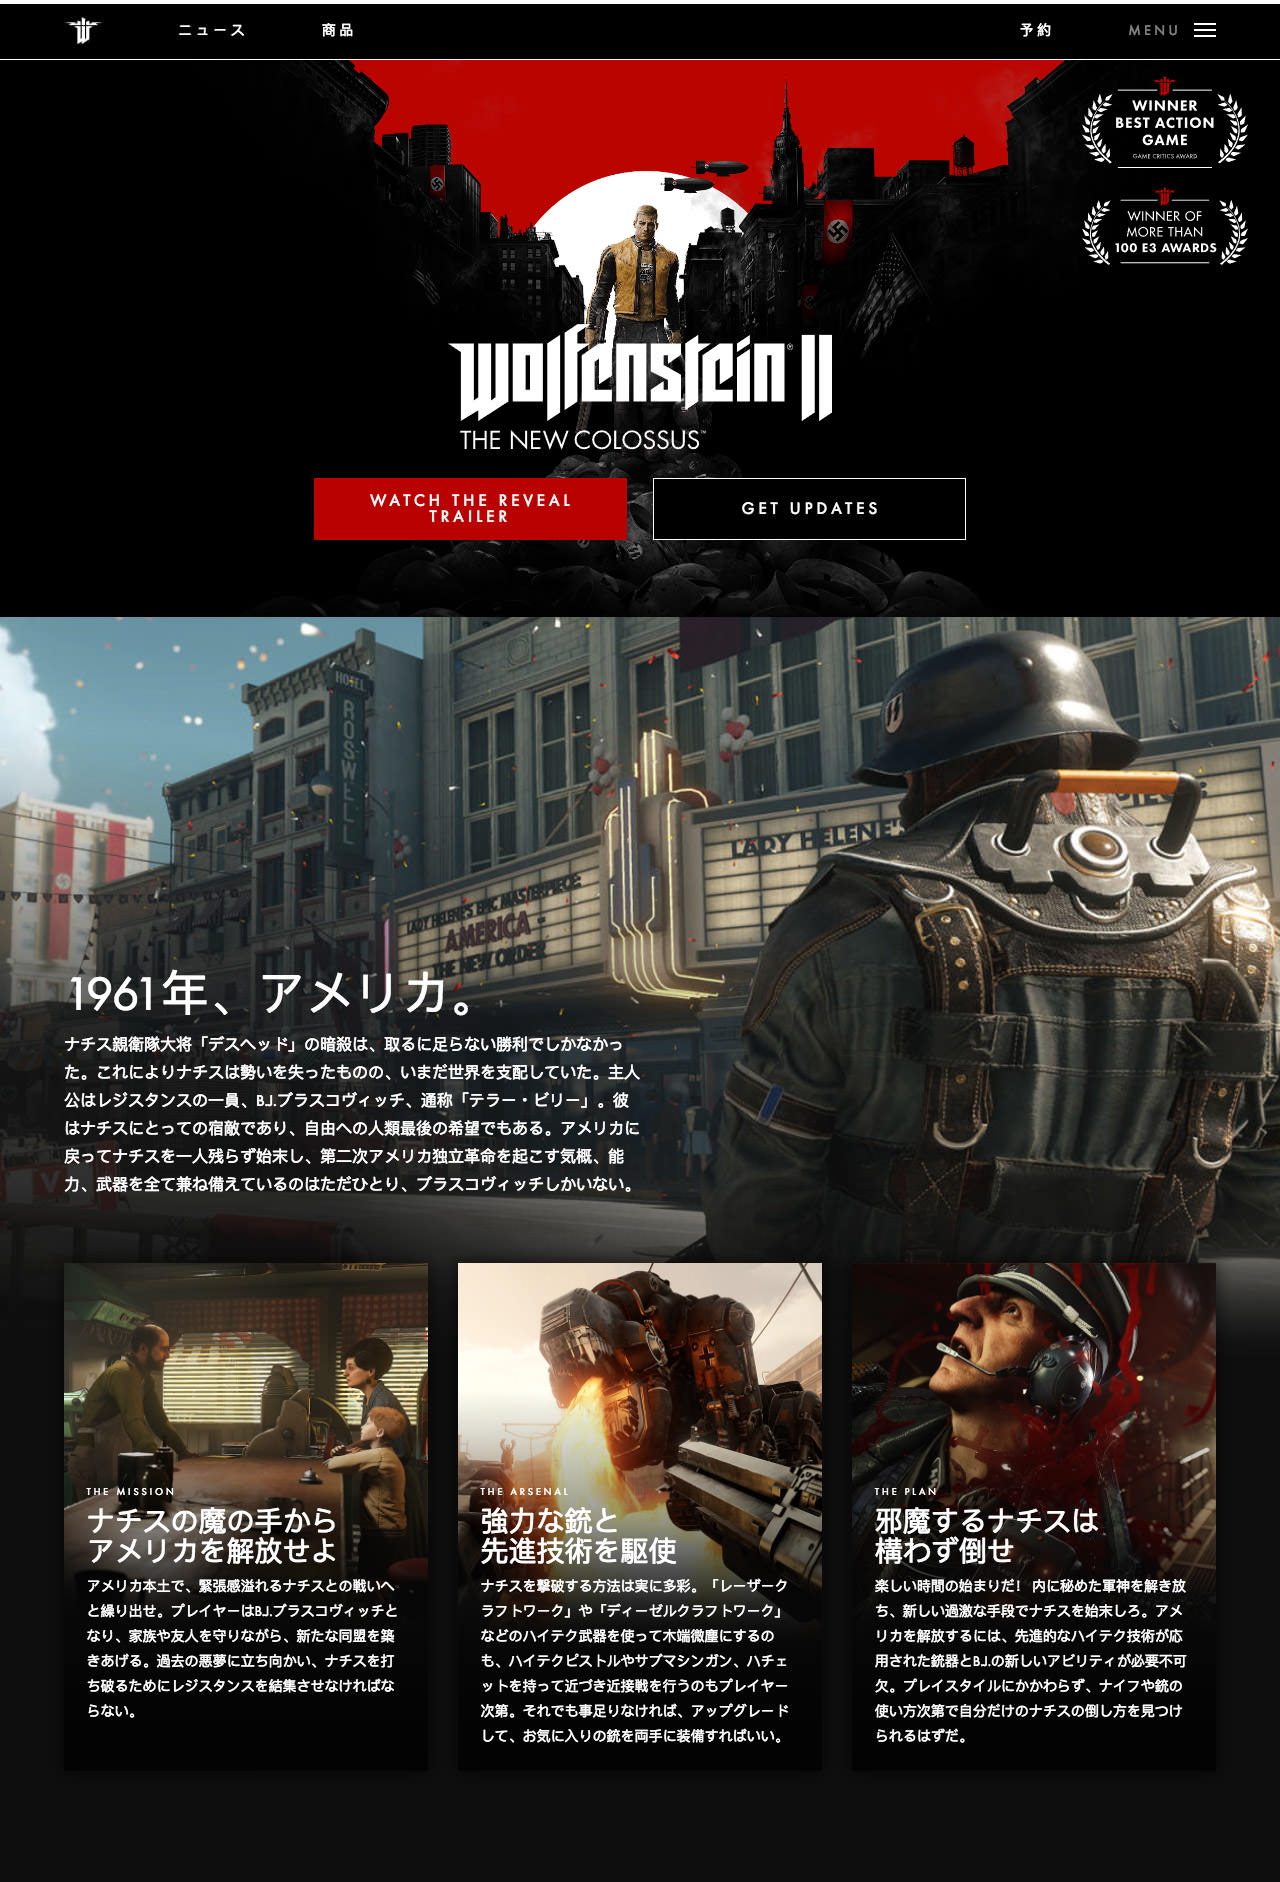 Homepage design in Japanese for the Wolfenstein II site